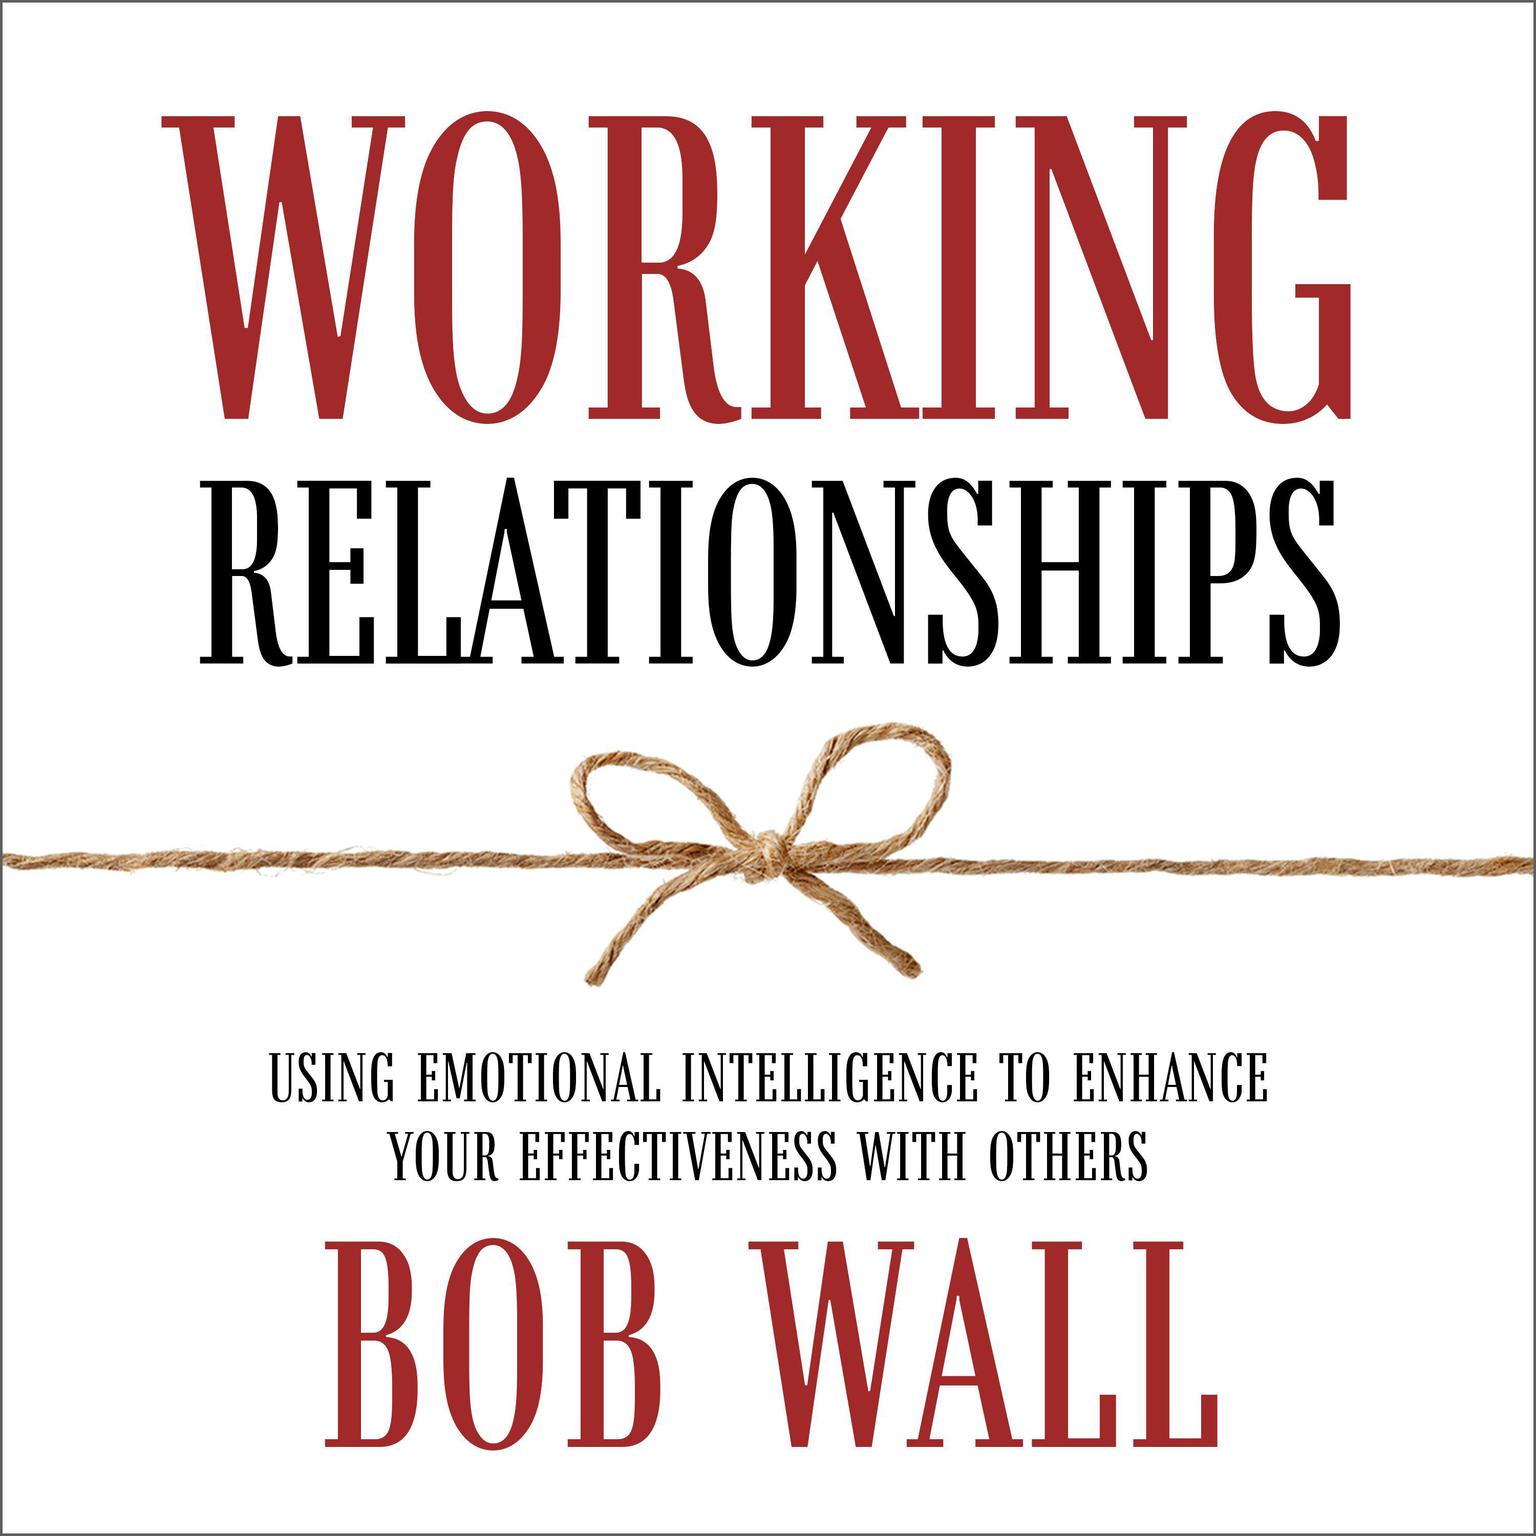 Working Relationships: Using Emotional Intelligence to Enhance Your Effectiveness with Others (Revised) Audiobook, by Bob Wall